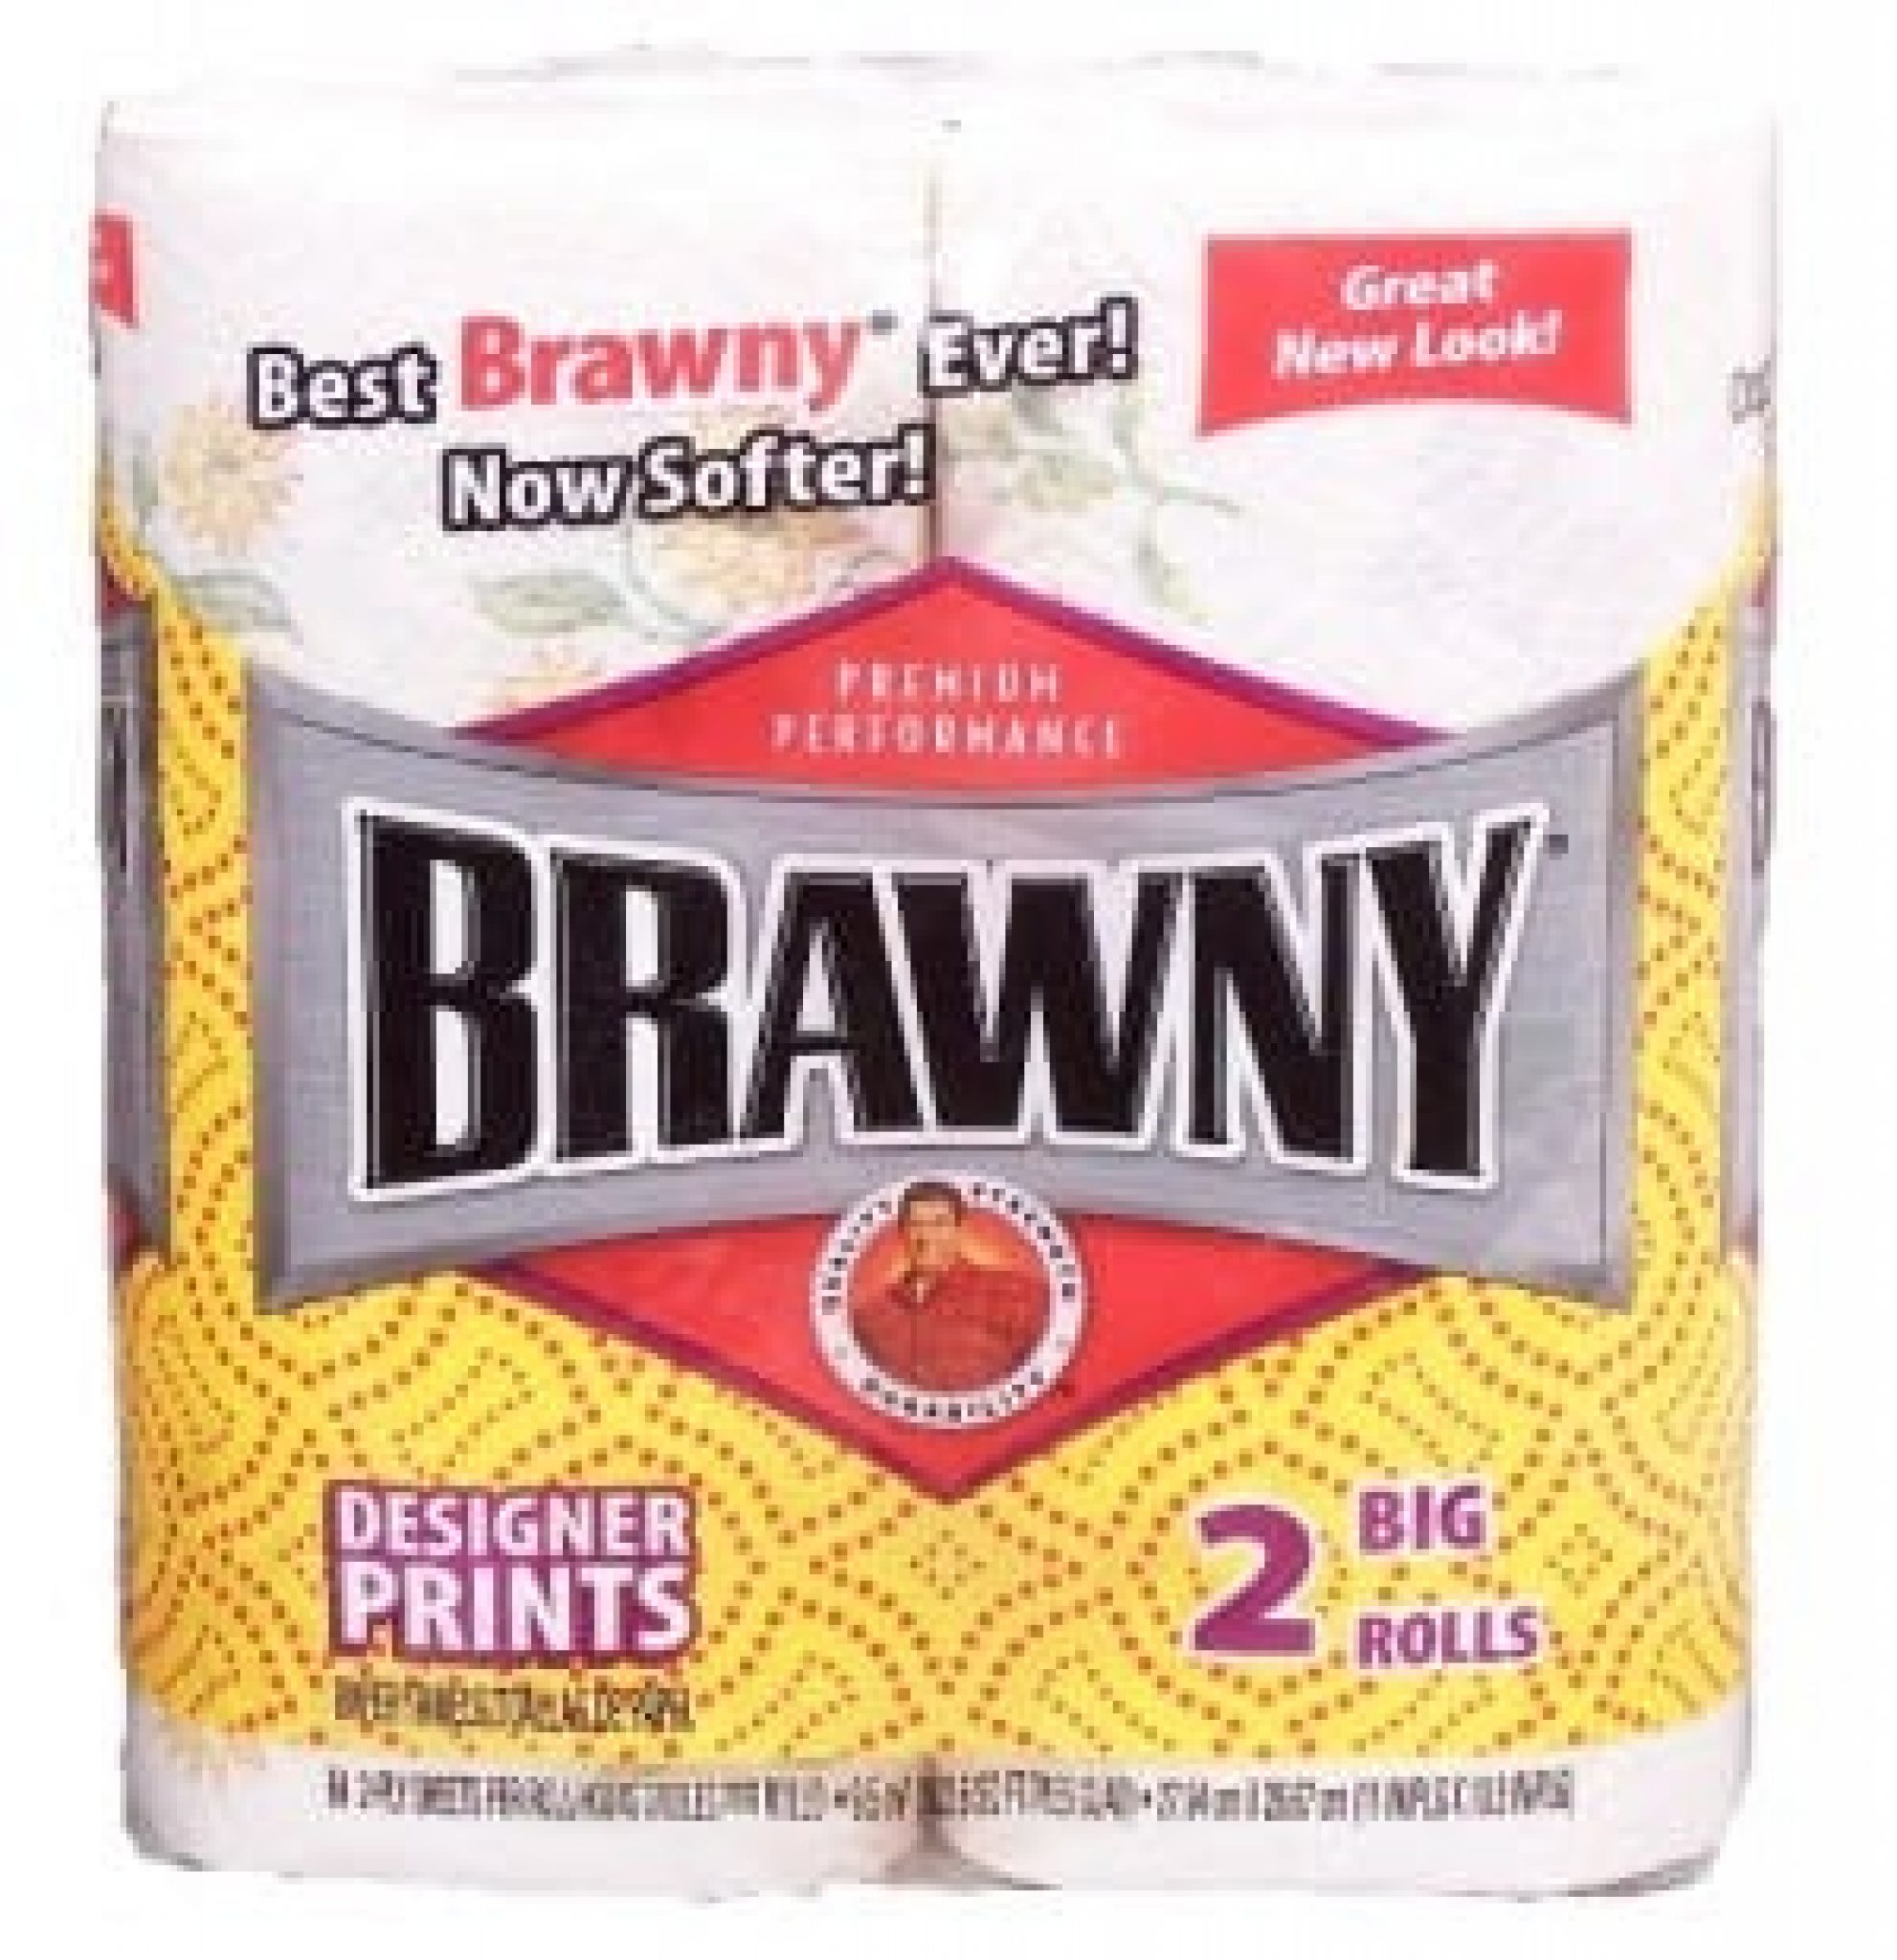 Printable Coupons: Brawny Zegerid and more